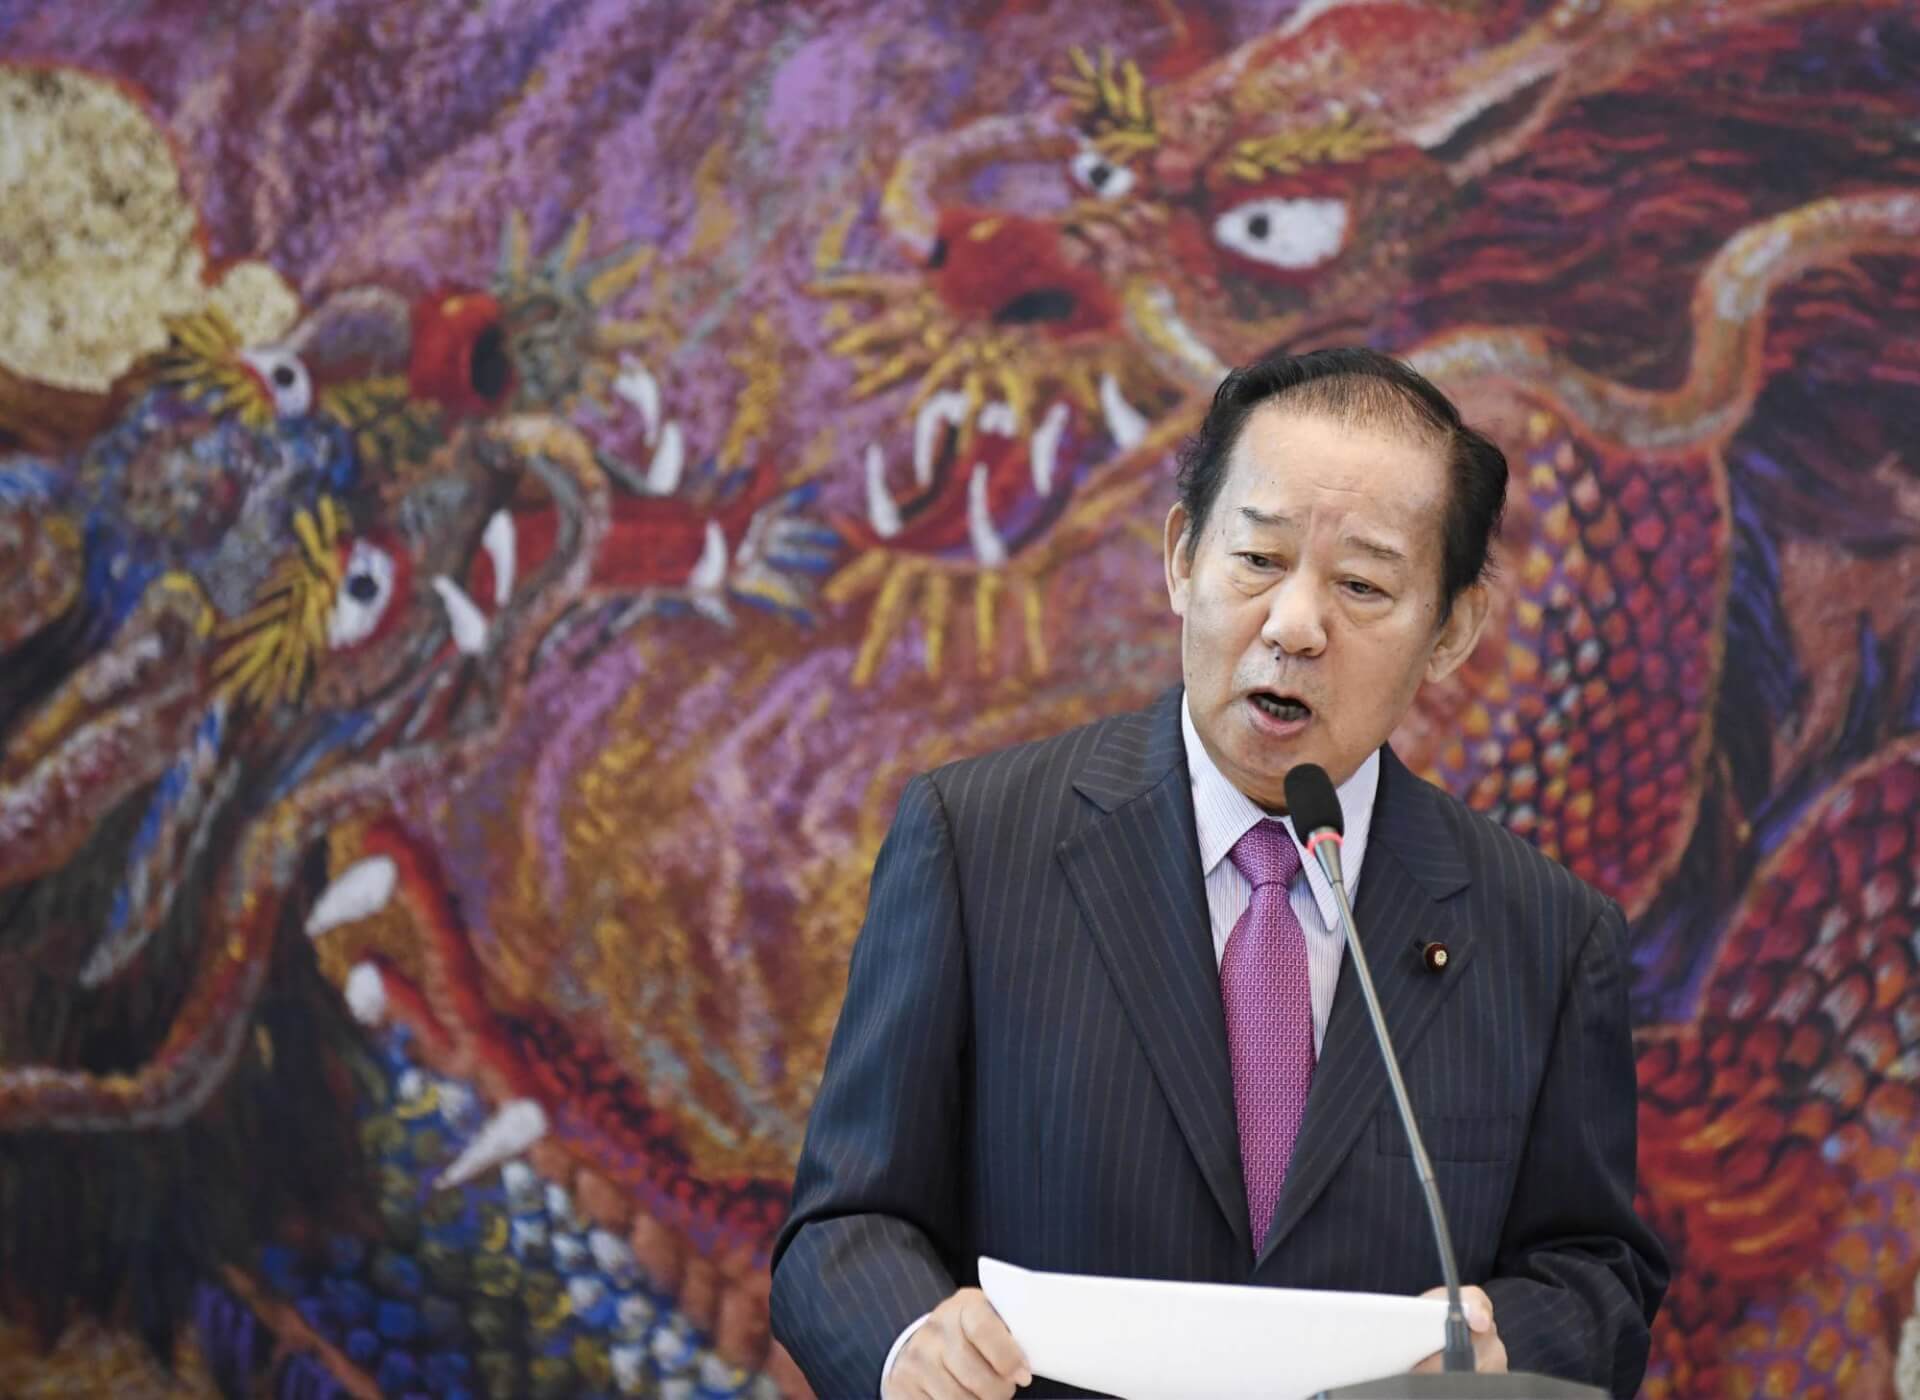 Japan’s Ruling LDP Invites Women to Attend Board-Level Meetings, Provided They Don’t Talk